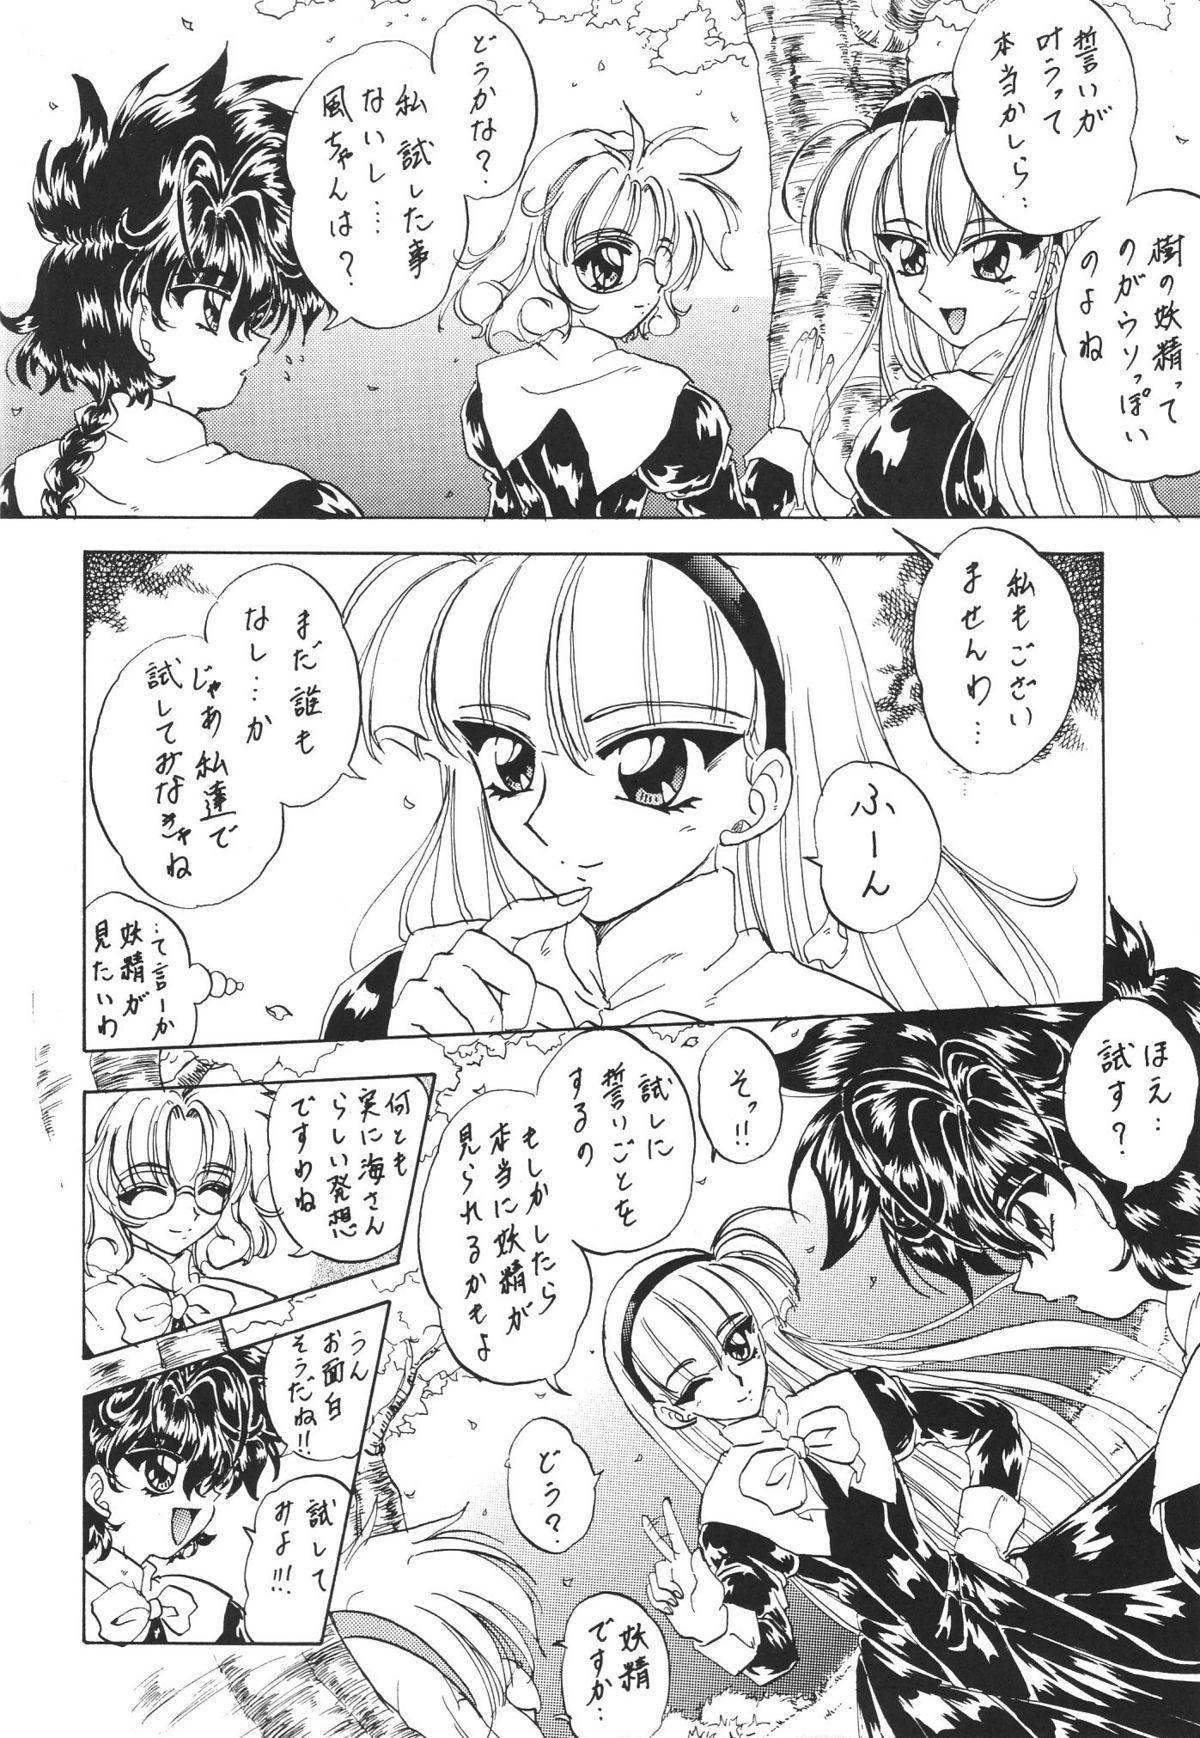 Fuck Stale World V - Magic knight rayearth Amateur Porn - Page 7